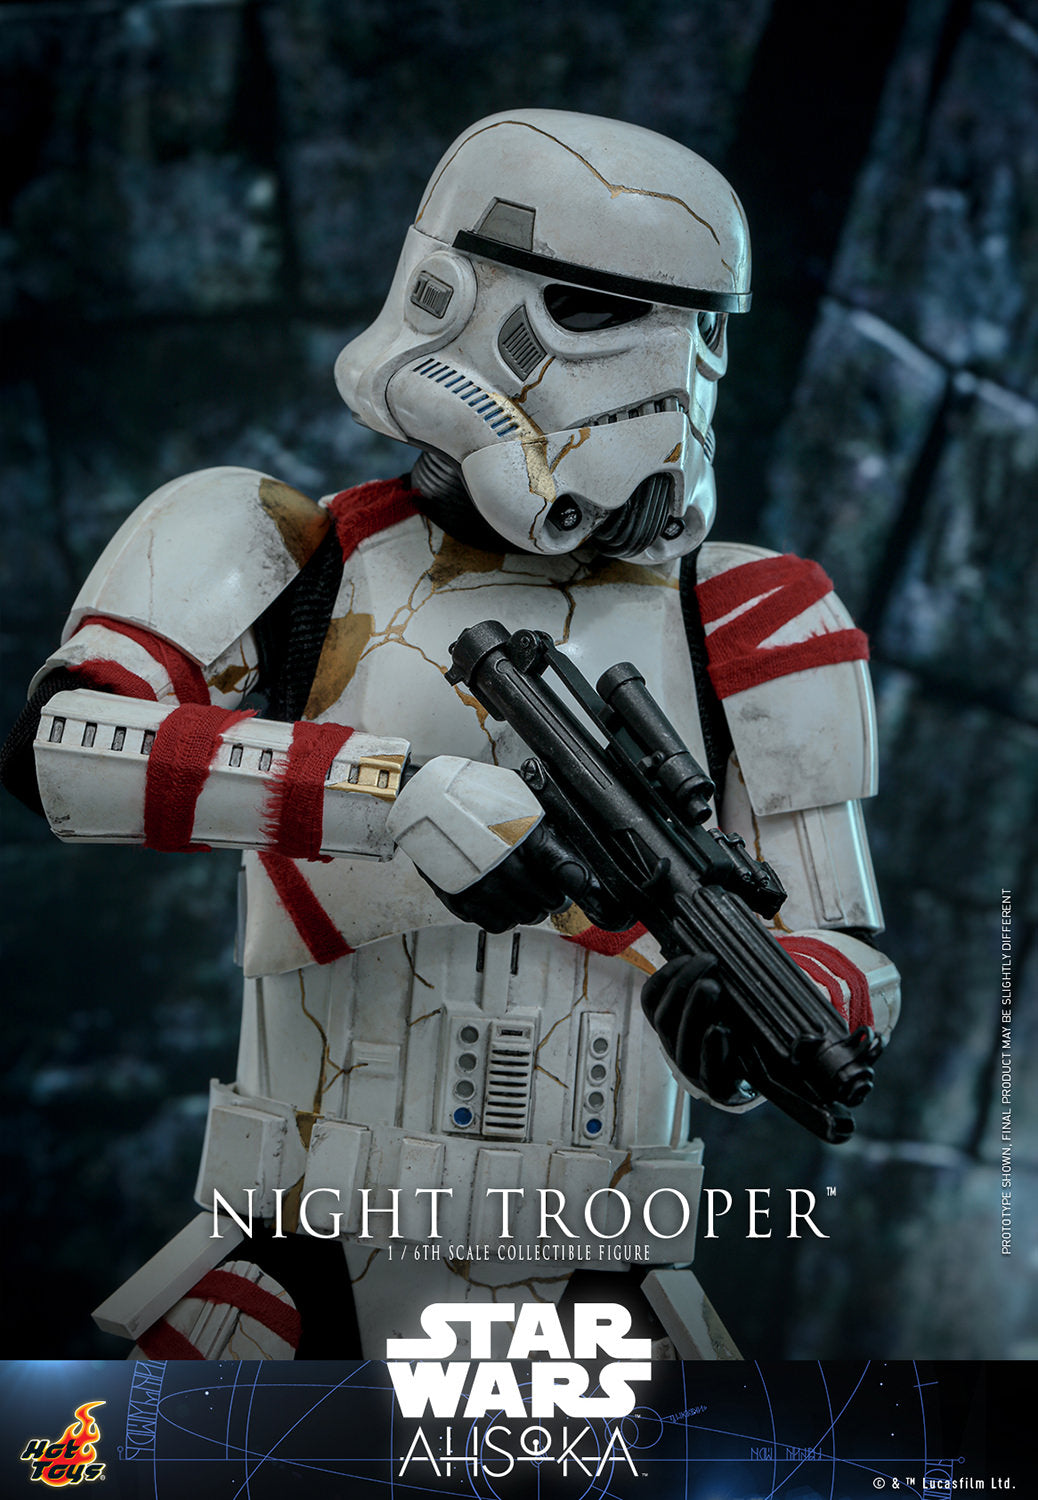 Night Trooper 1/6 Scale Figure by Hot Toys